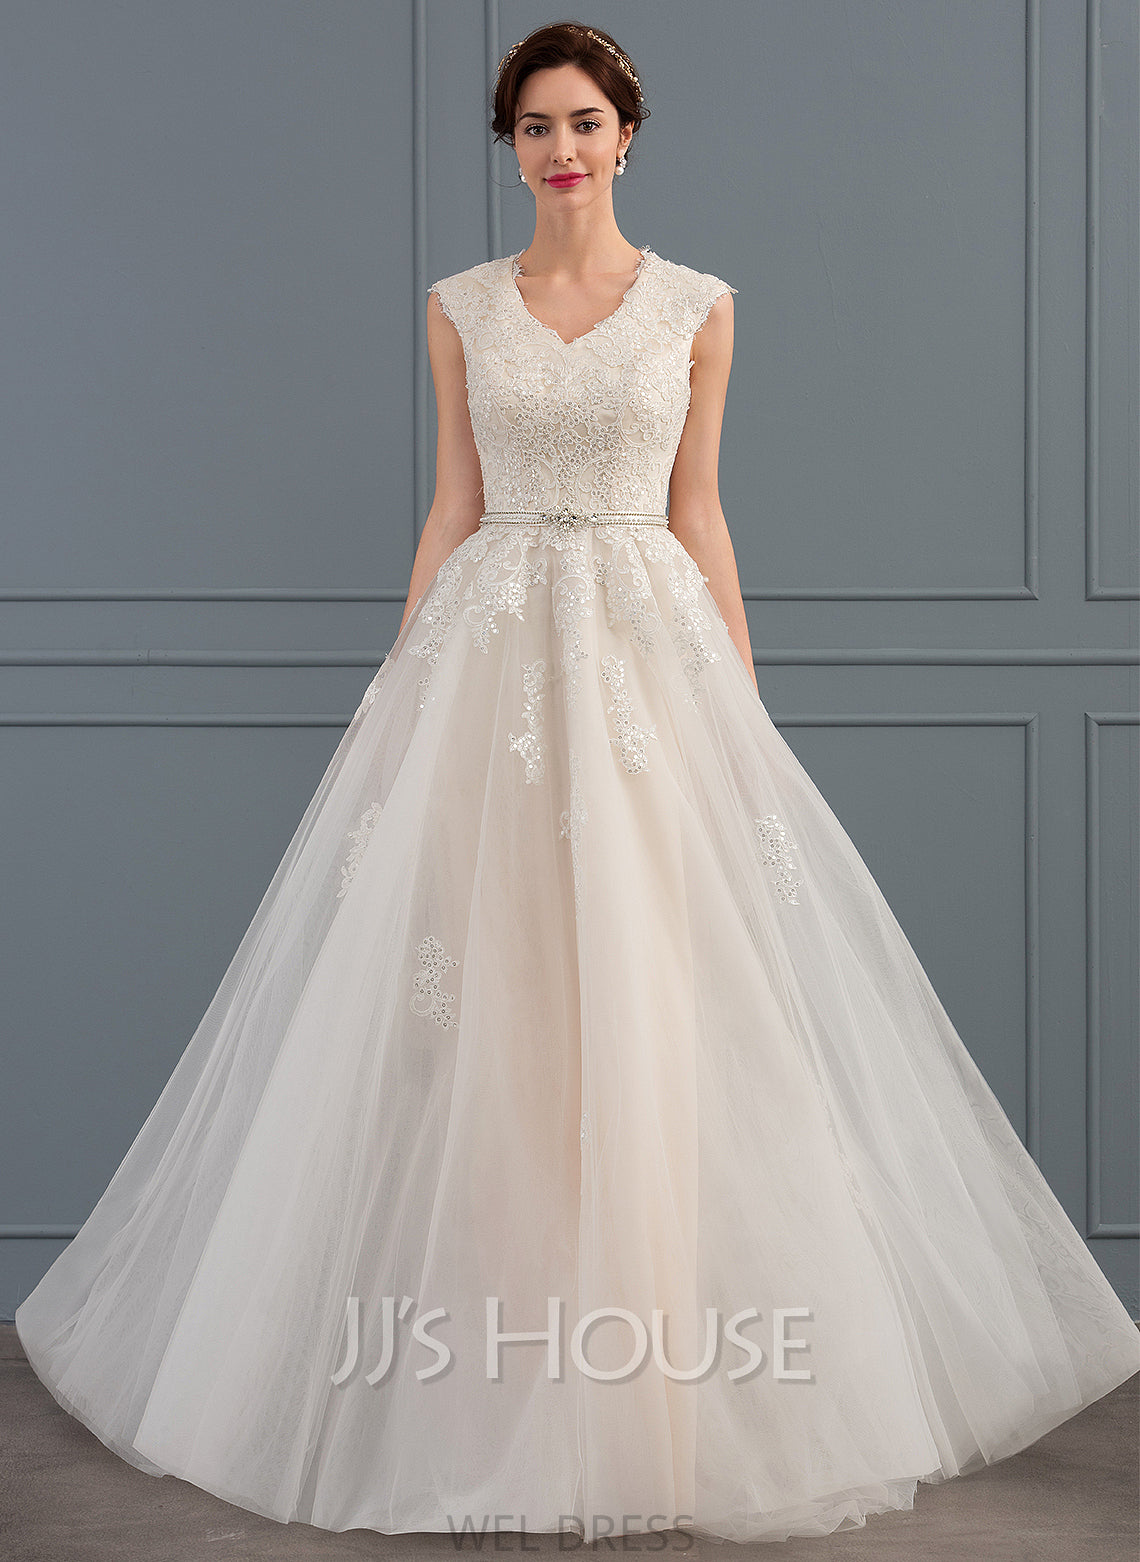 Sequins Tulle Bow(s) Wedding Dresses V-neck Audrina Wedding With Sweep Beading Train Dress A-Line